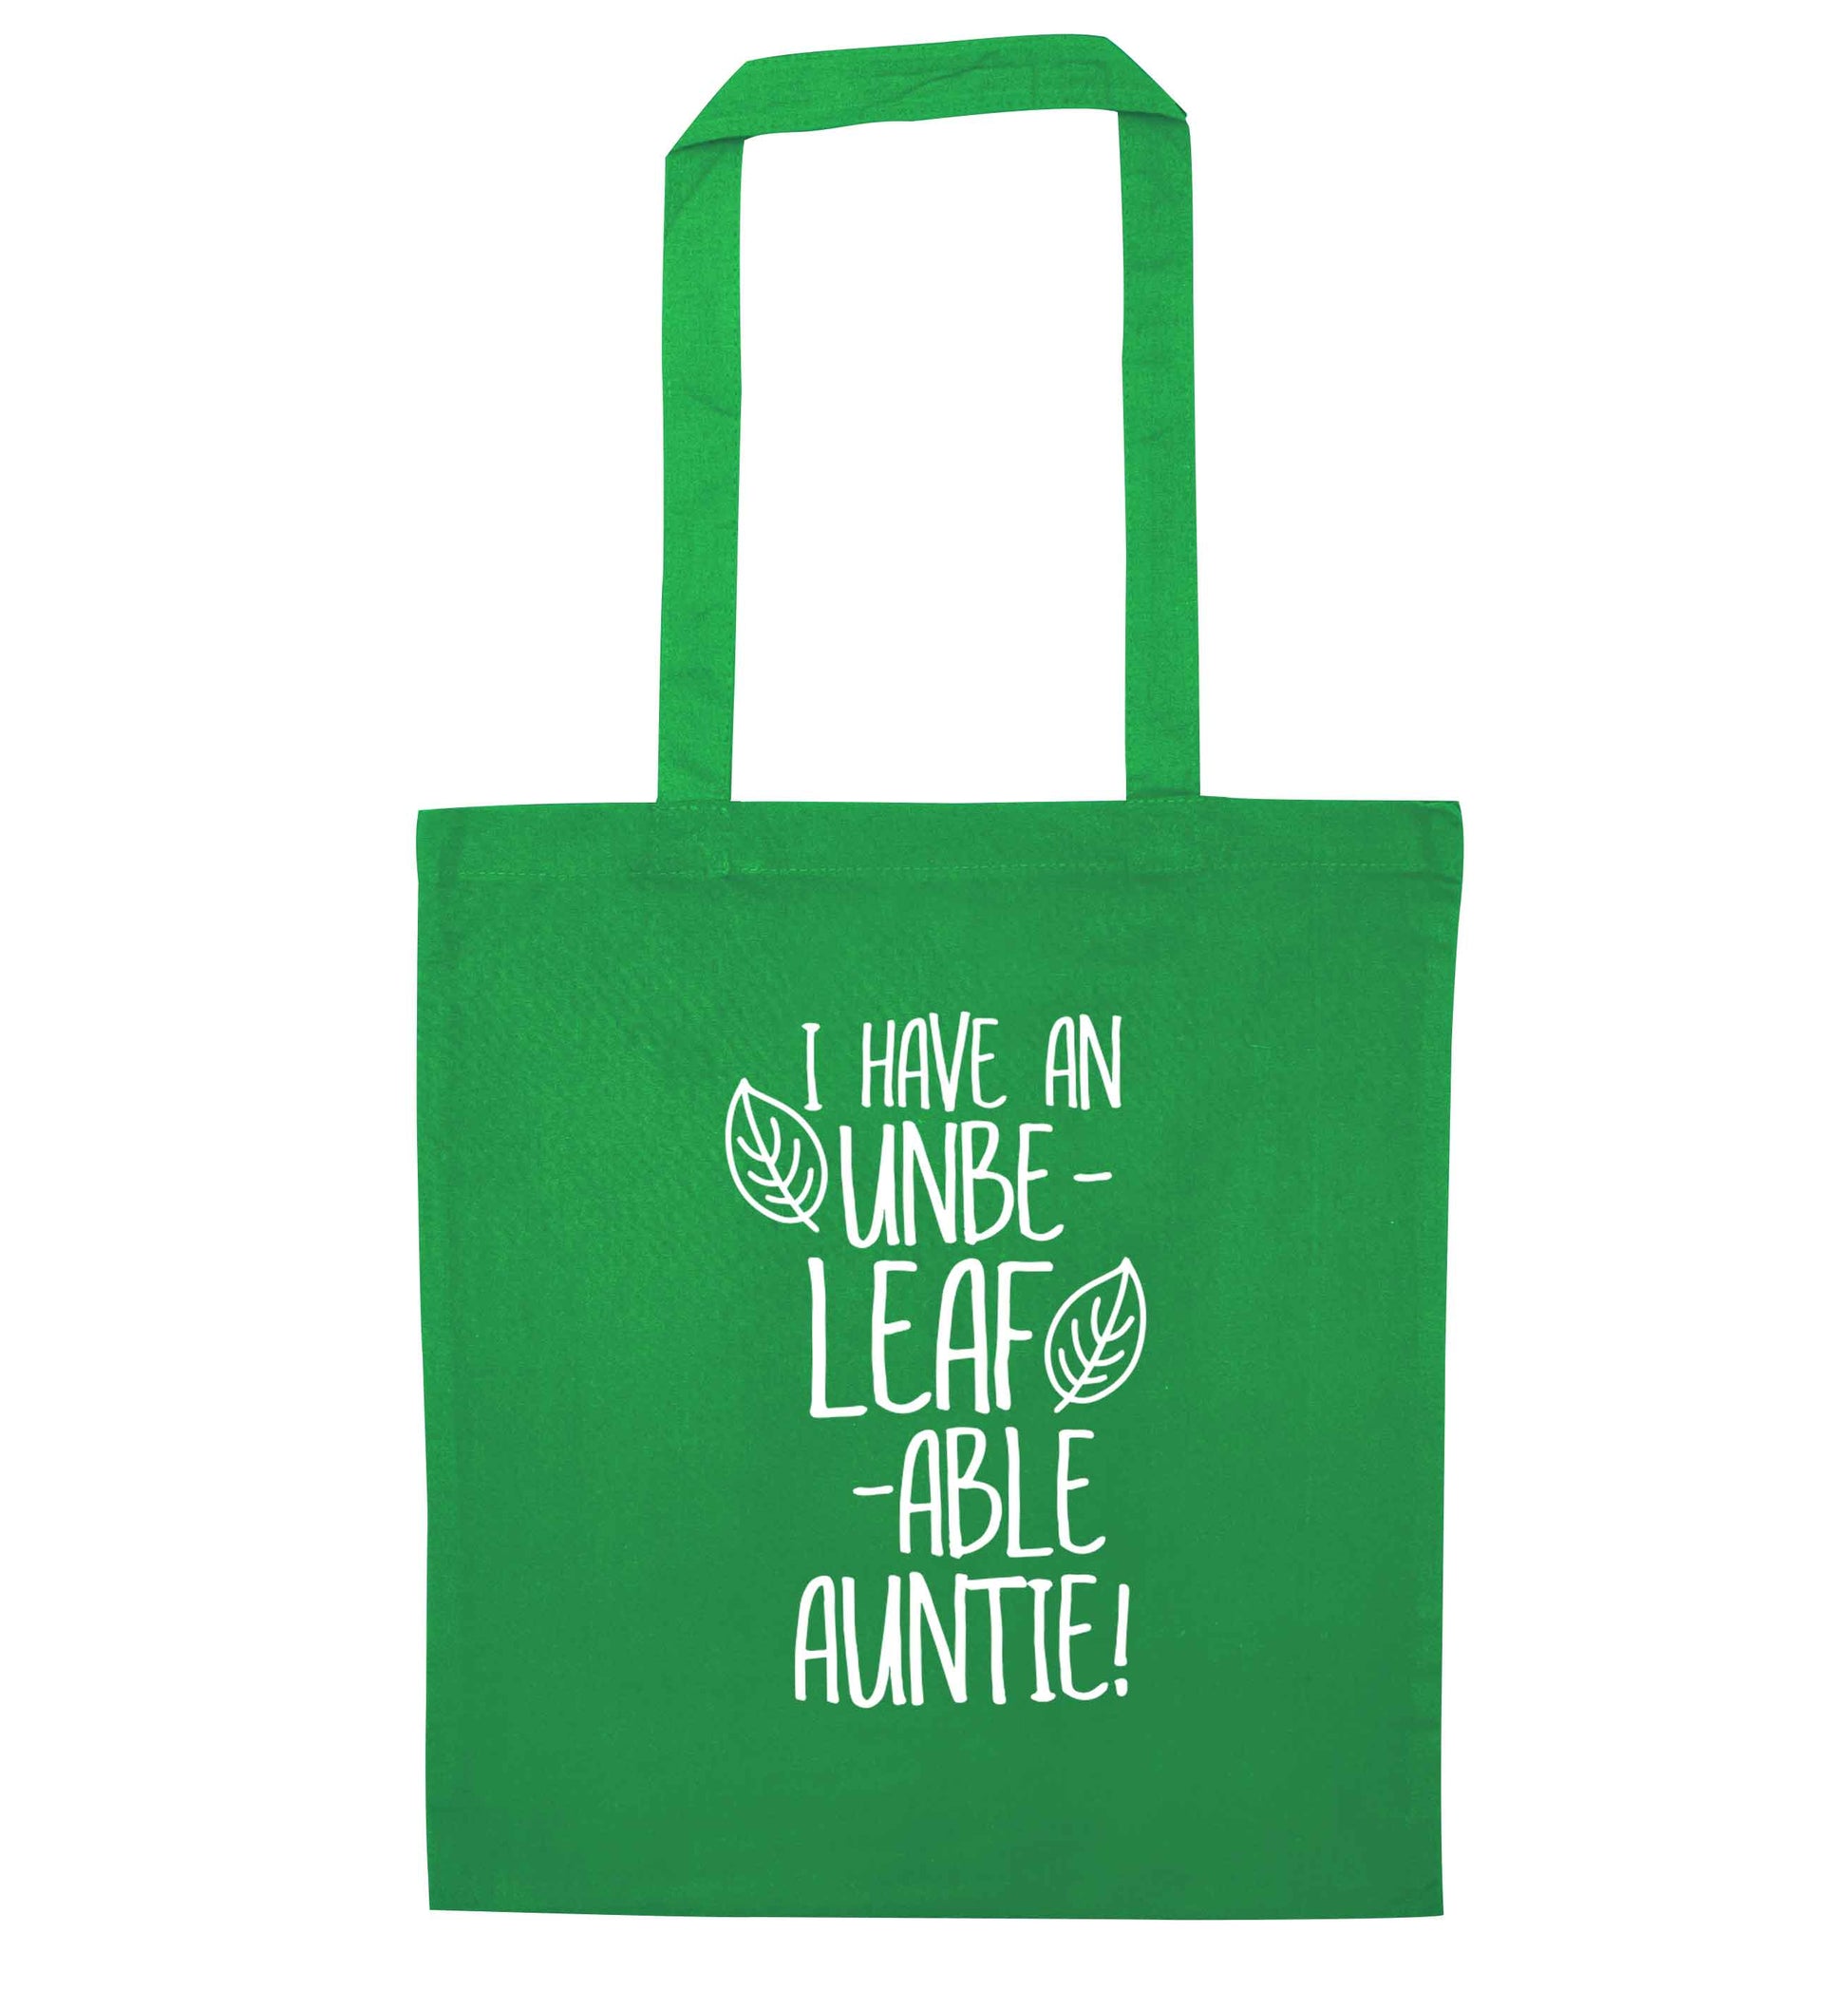 I have an unbe-leaf-able auntie green tote bag